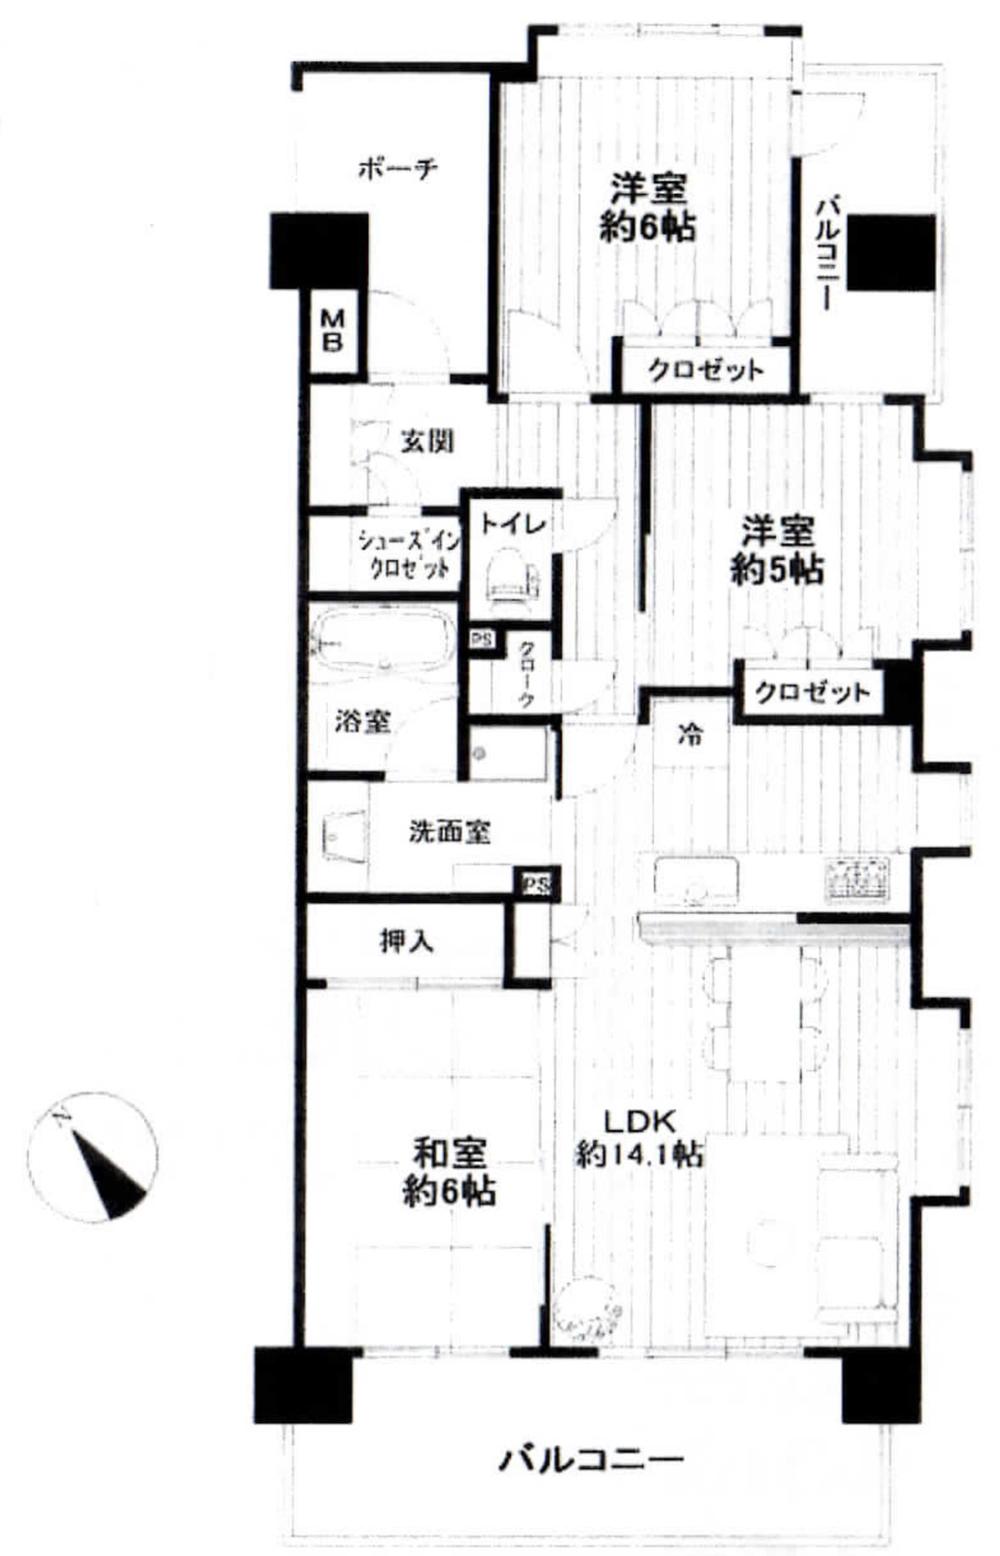 Floor plan. 3LDK, Price 25,500,000 yen, Occupied area 73.73 sq m , Spacious apartment balcony area 16.42 sq m 73.73 sq m. You can use abundant and clean storage.